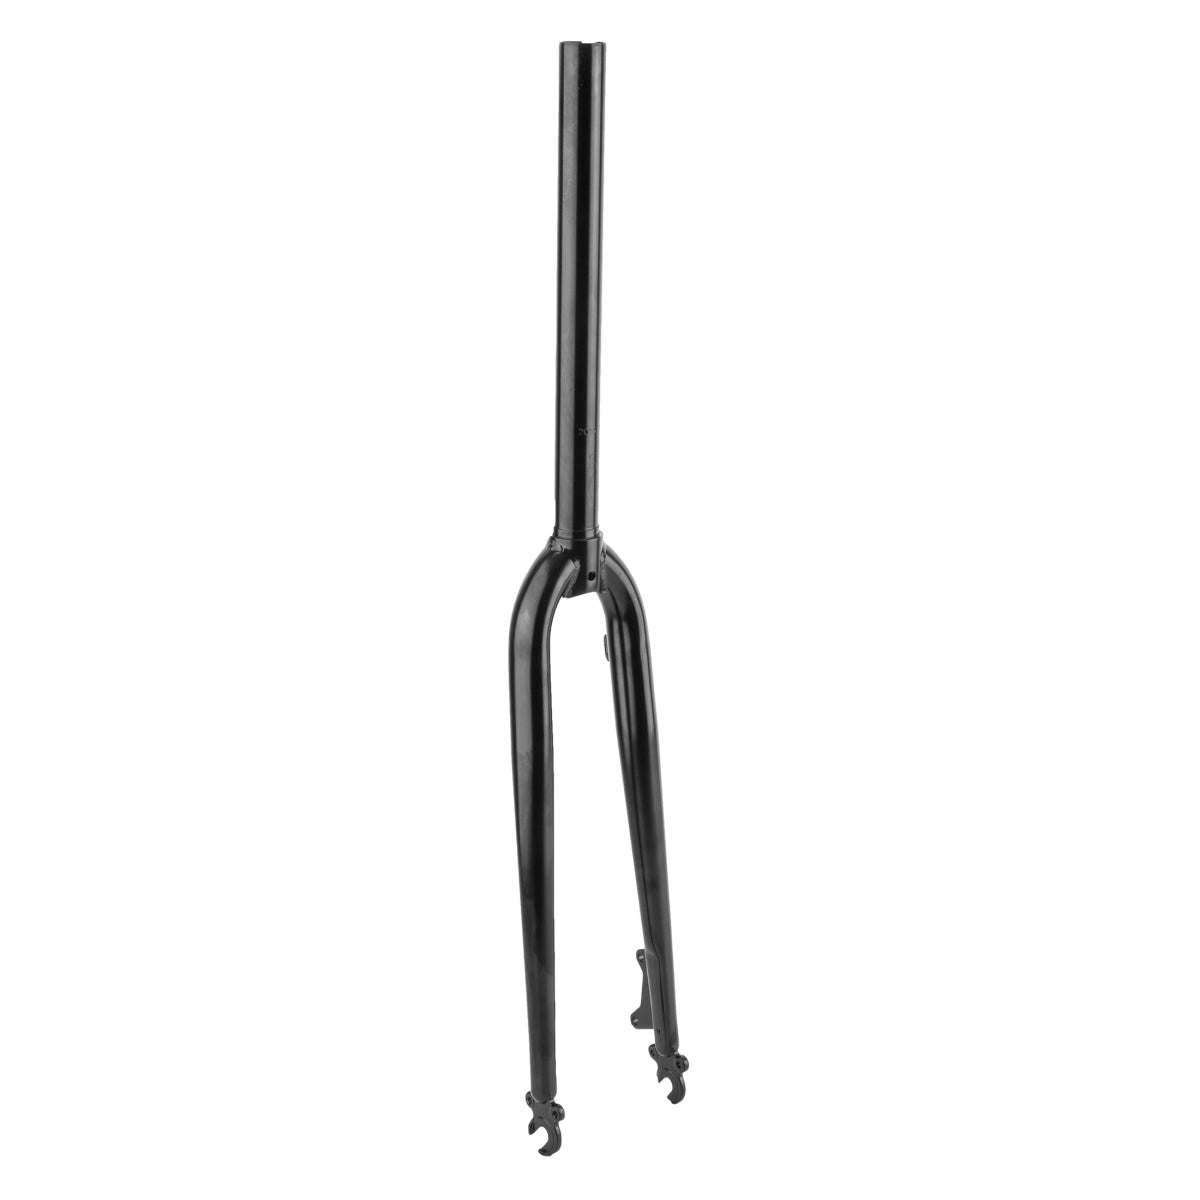 Origin8 Pro Pulsion Synergy 700c Road Fork, Alloy/Carbon, 1